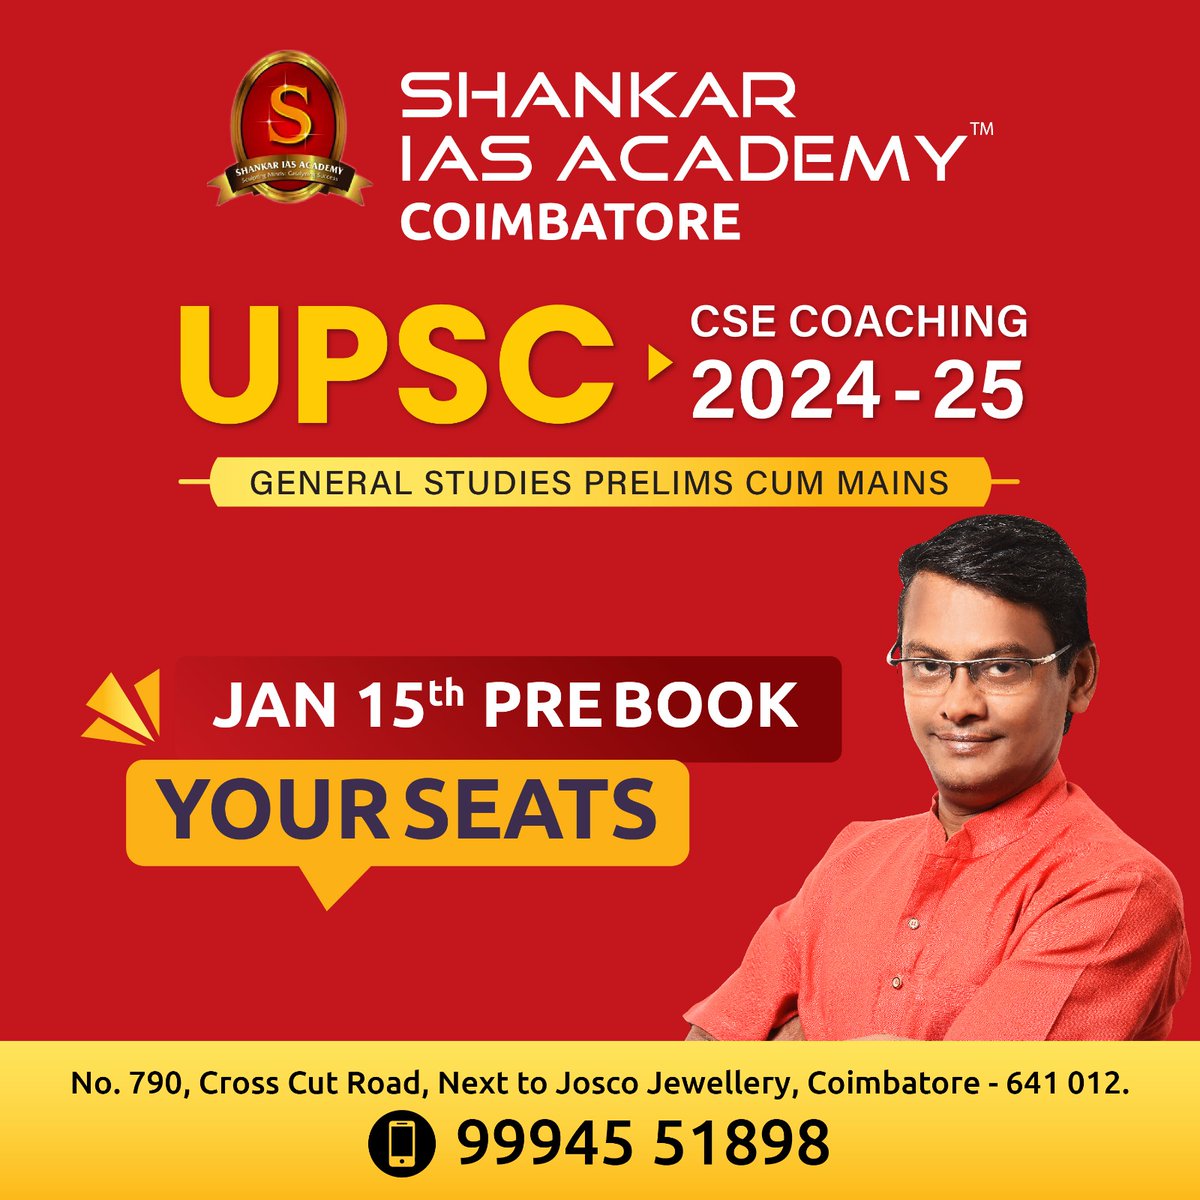 Kick Start your UPSC Civil Service Preparation. Admission opens for UPSC 204-25. Prebook your seats. Starts from Jan 15th. For more details - Call -9994551898 #upscexam #admissionsopen #civilservices #upscexam